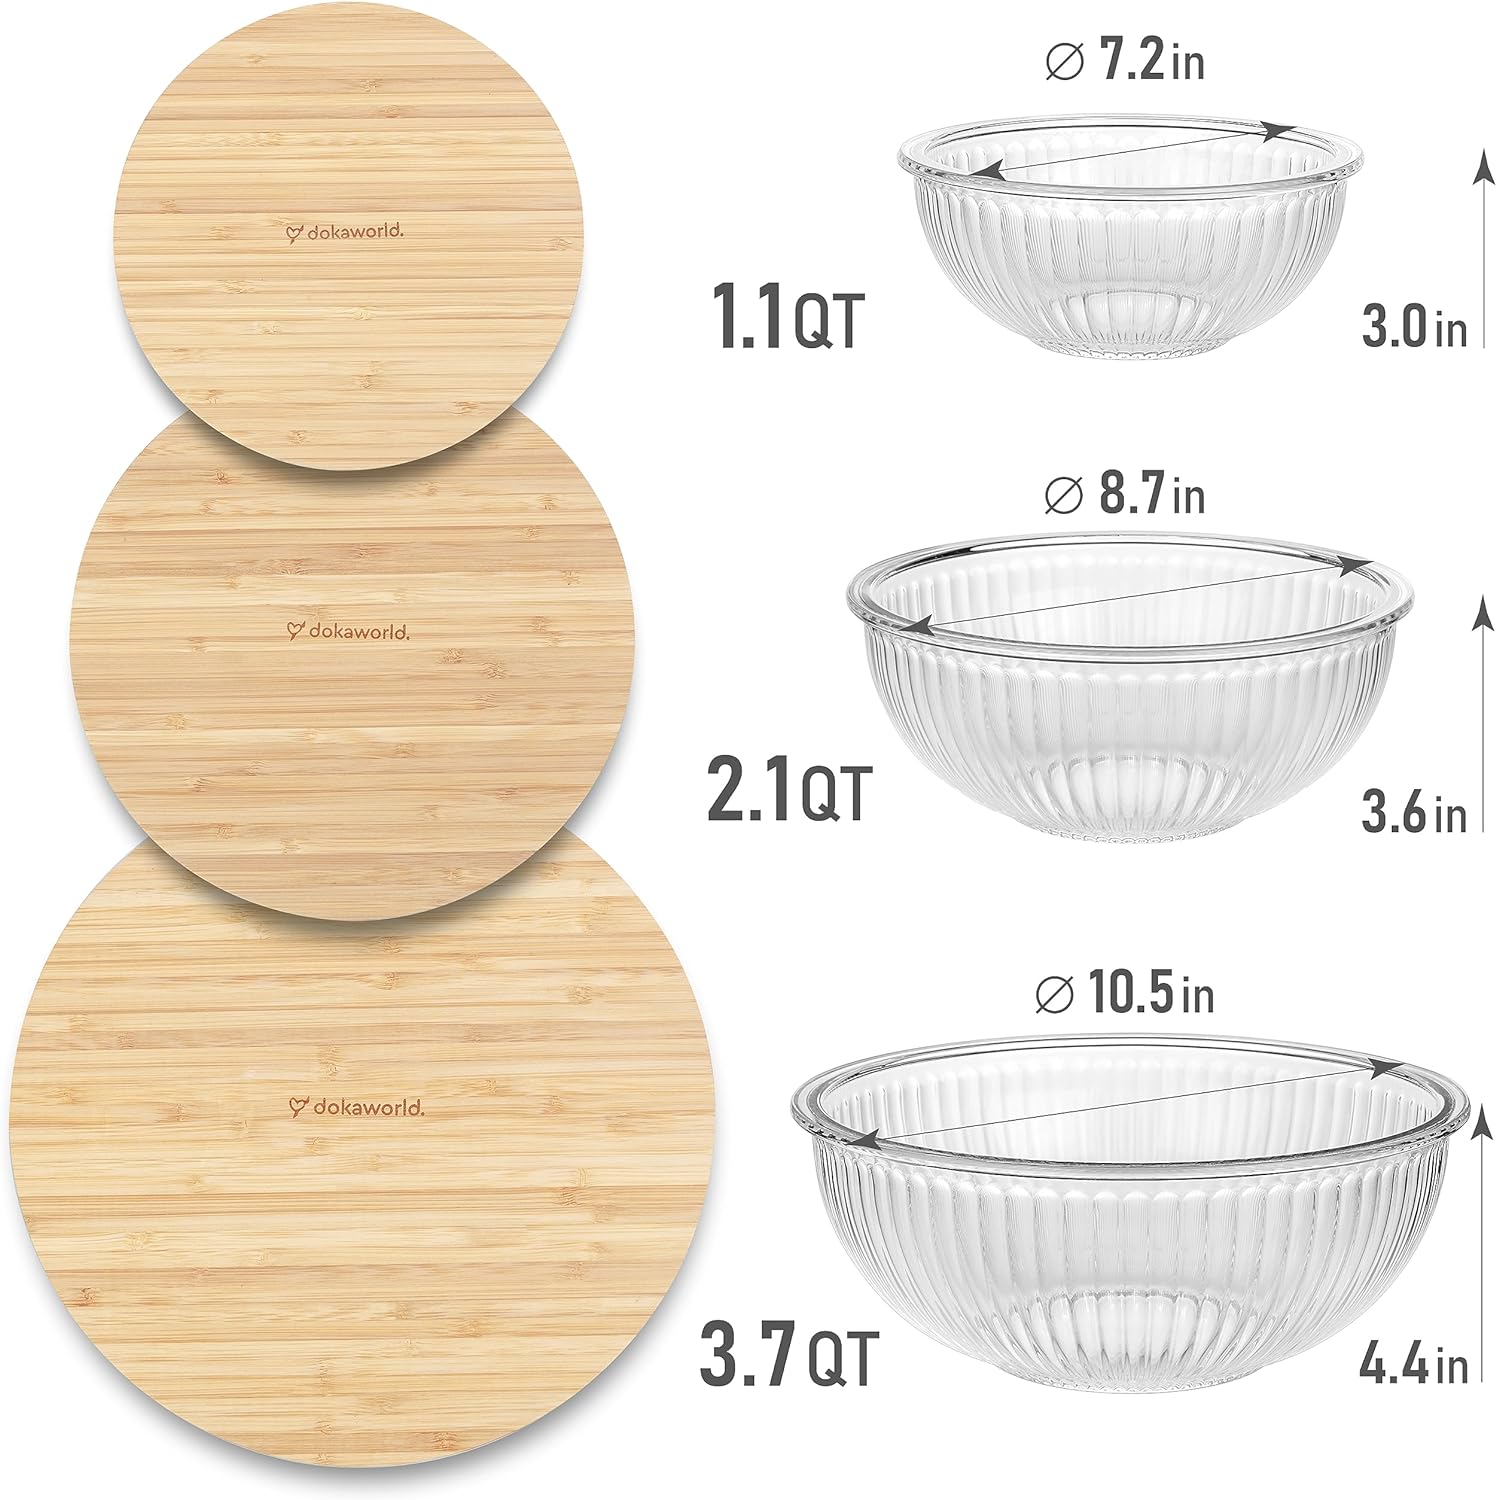 https://bigbigmart.com/wp-content/uploads/2023/09/Dokaworld-Glass-Mixing-Bowls-Nesting-Bowls-Cute-Collapsible-Glass-Bowls-With-Lids-Food-Storage-3-Stackable-Microwave-Safe-Glass-Containers-Salad-Bamboo-Mixing-Bowls-Baking-Glass-Bowls-Set-For-Kitchen-5.jpg